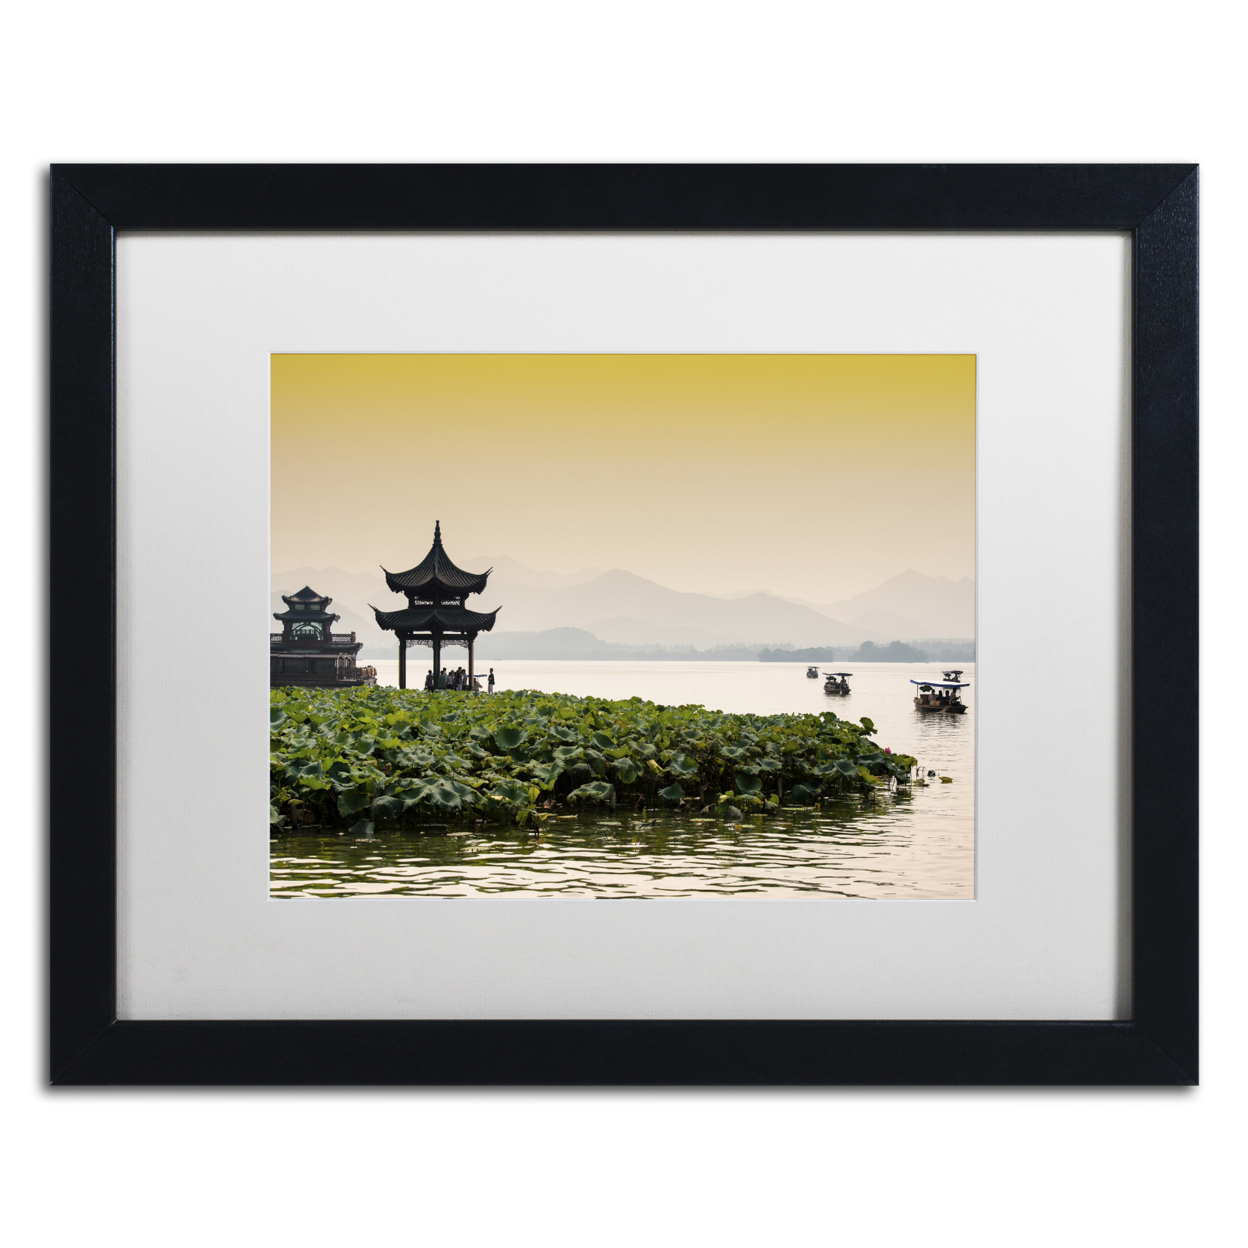 Philippe Hugonnard 'West Lake' Black Wooden Framed Art 18 X 22 Inches